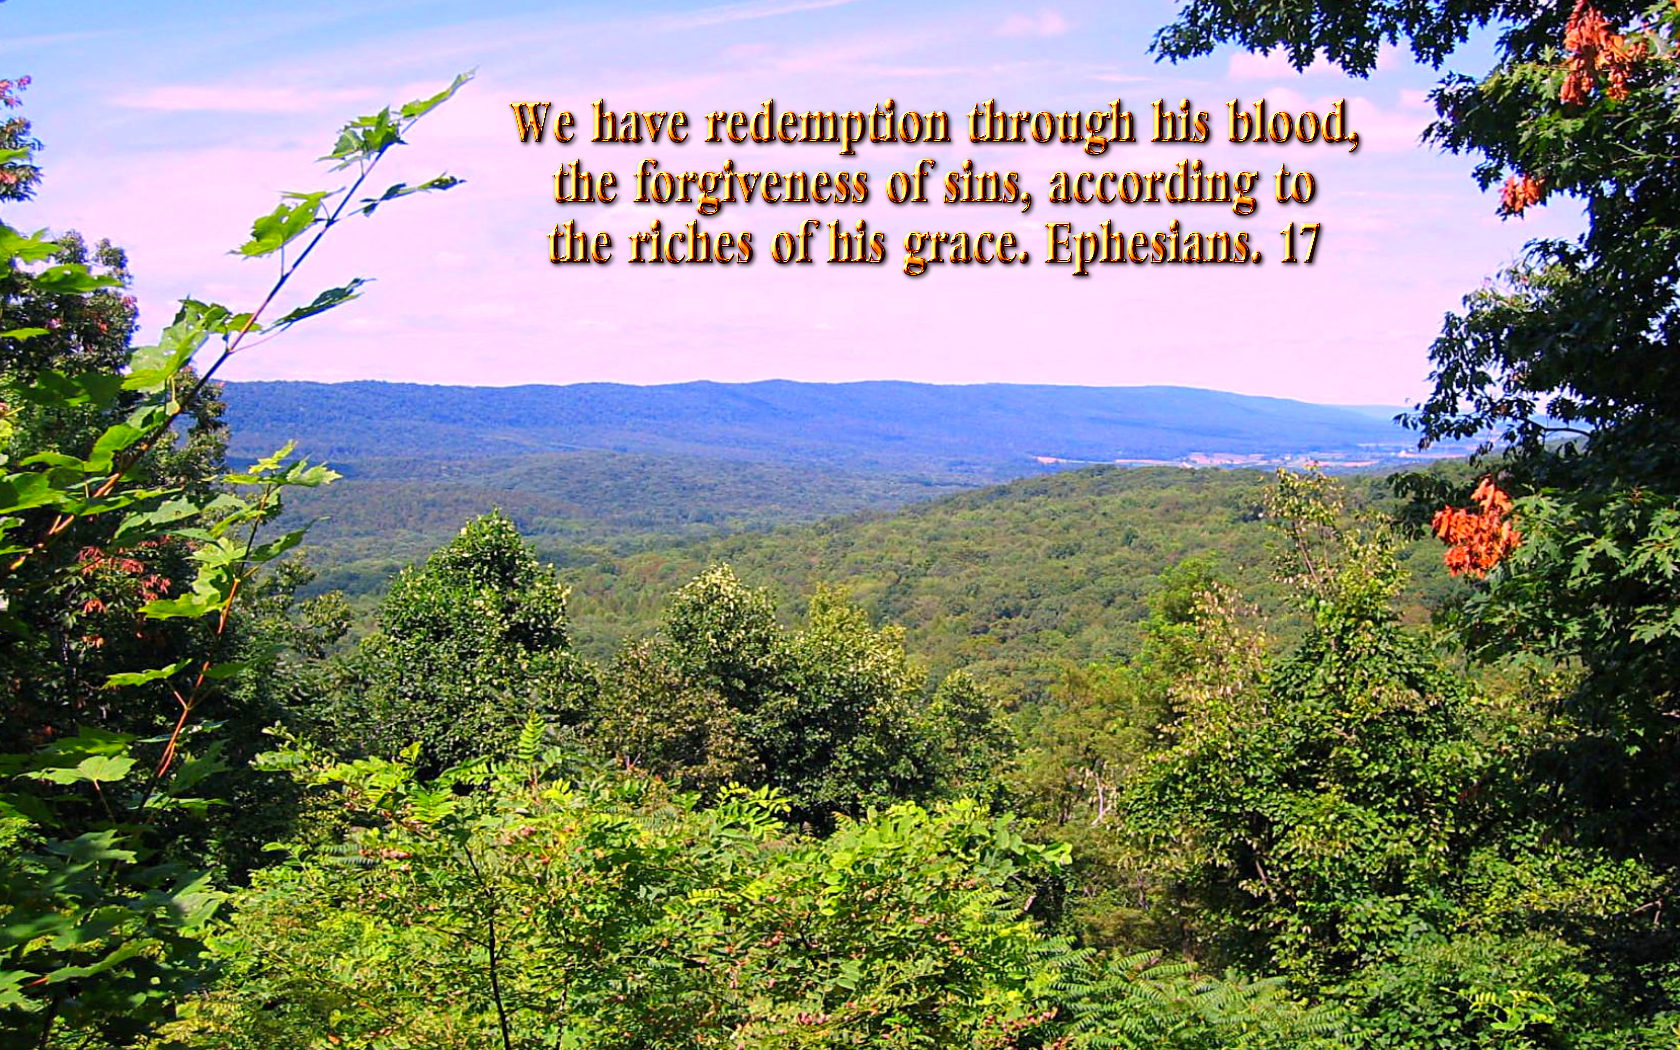 We Have Redemption Through His Blood, The Forgiveness - Natural Beauty Bible Verses About Nature - HD Wallpaper 